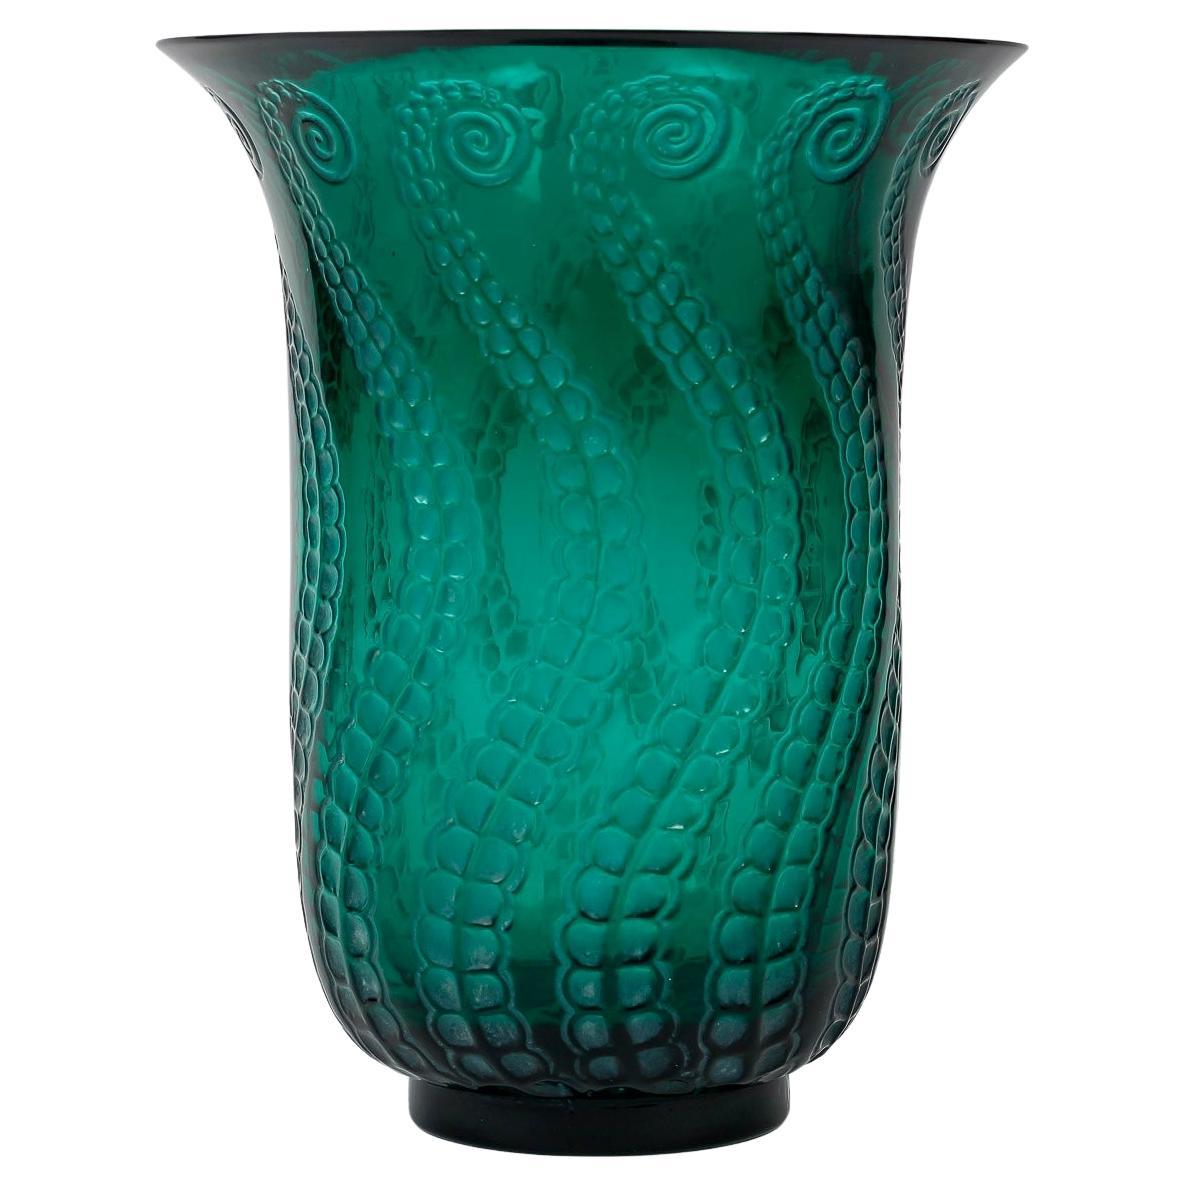 1921 Rene Lalique Vase Meduse Emerald Green Glass with White Patina For Sale